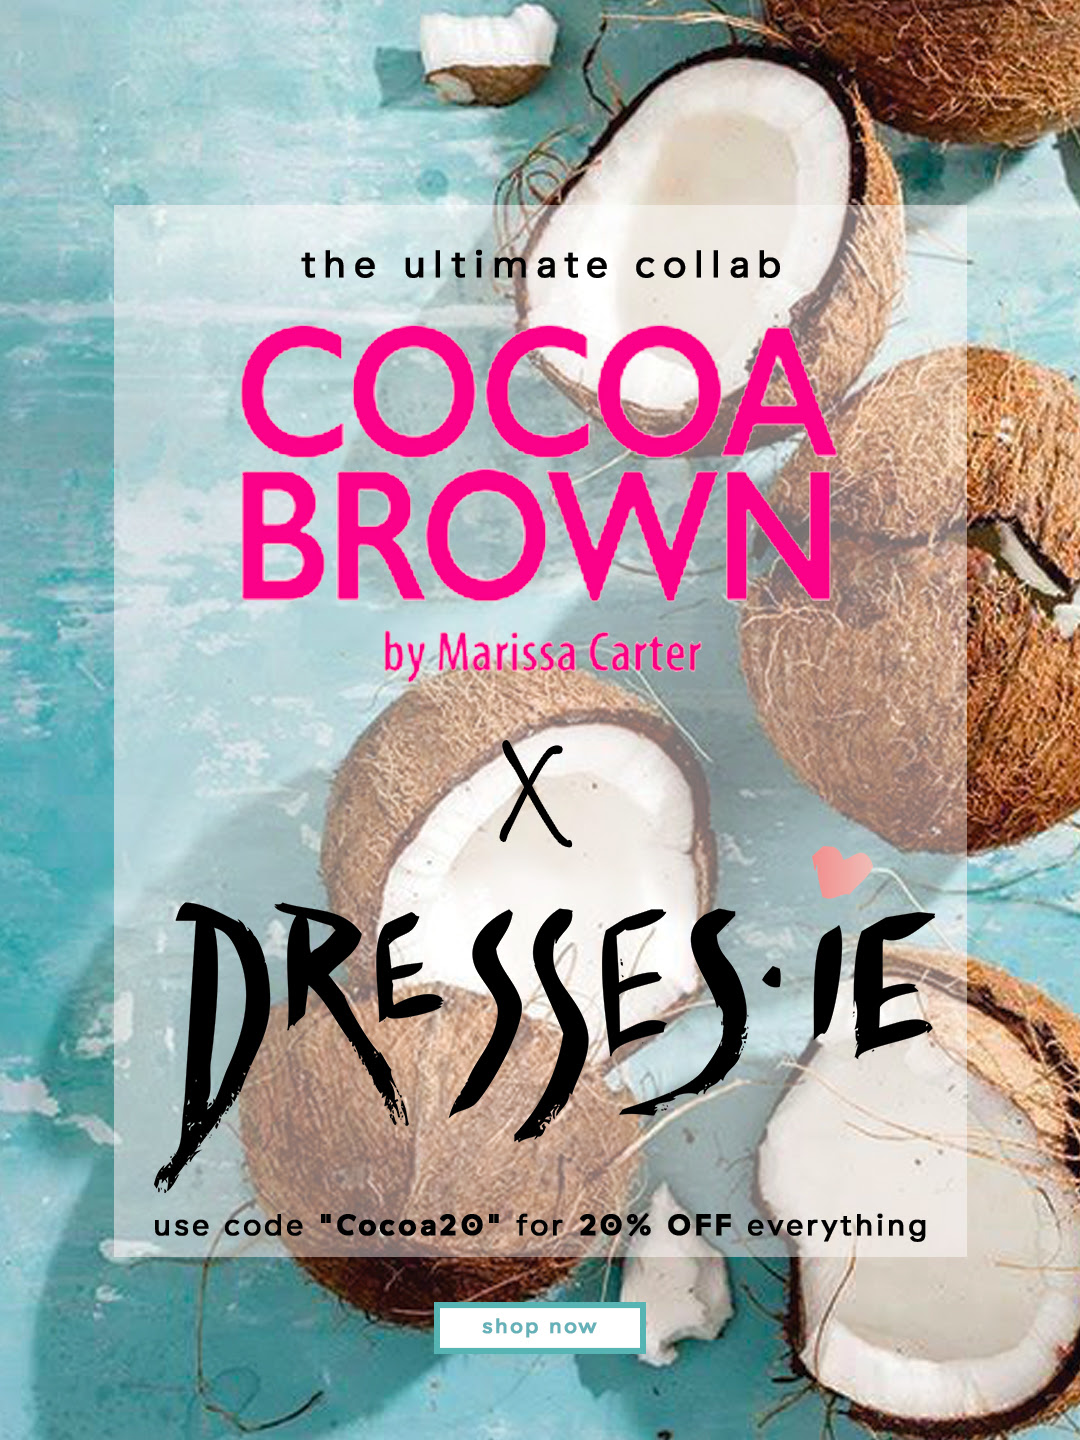 Dresses.ie - Cocoa Brown is here to stay